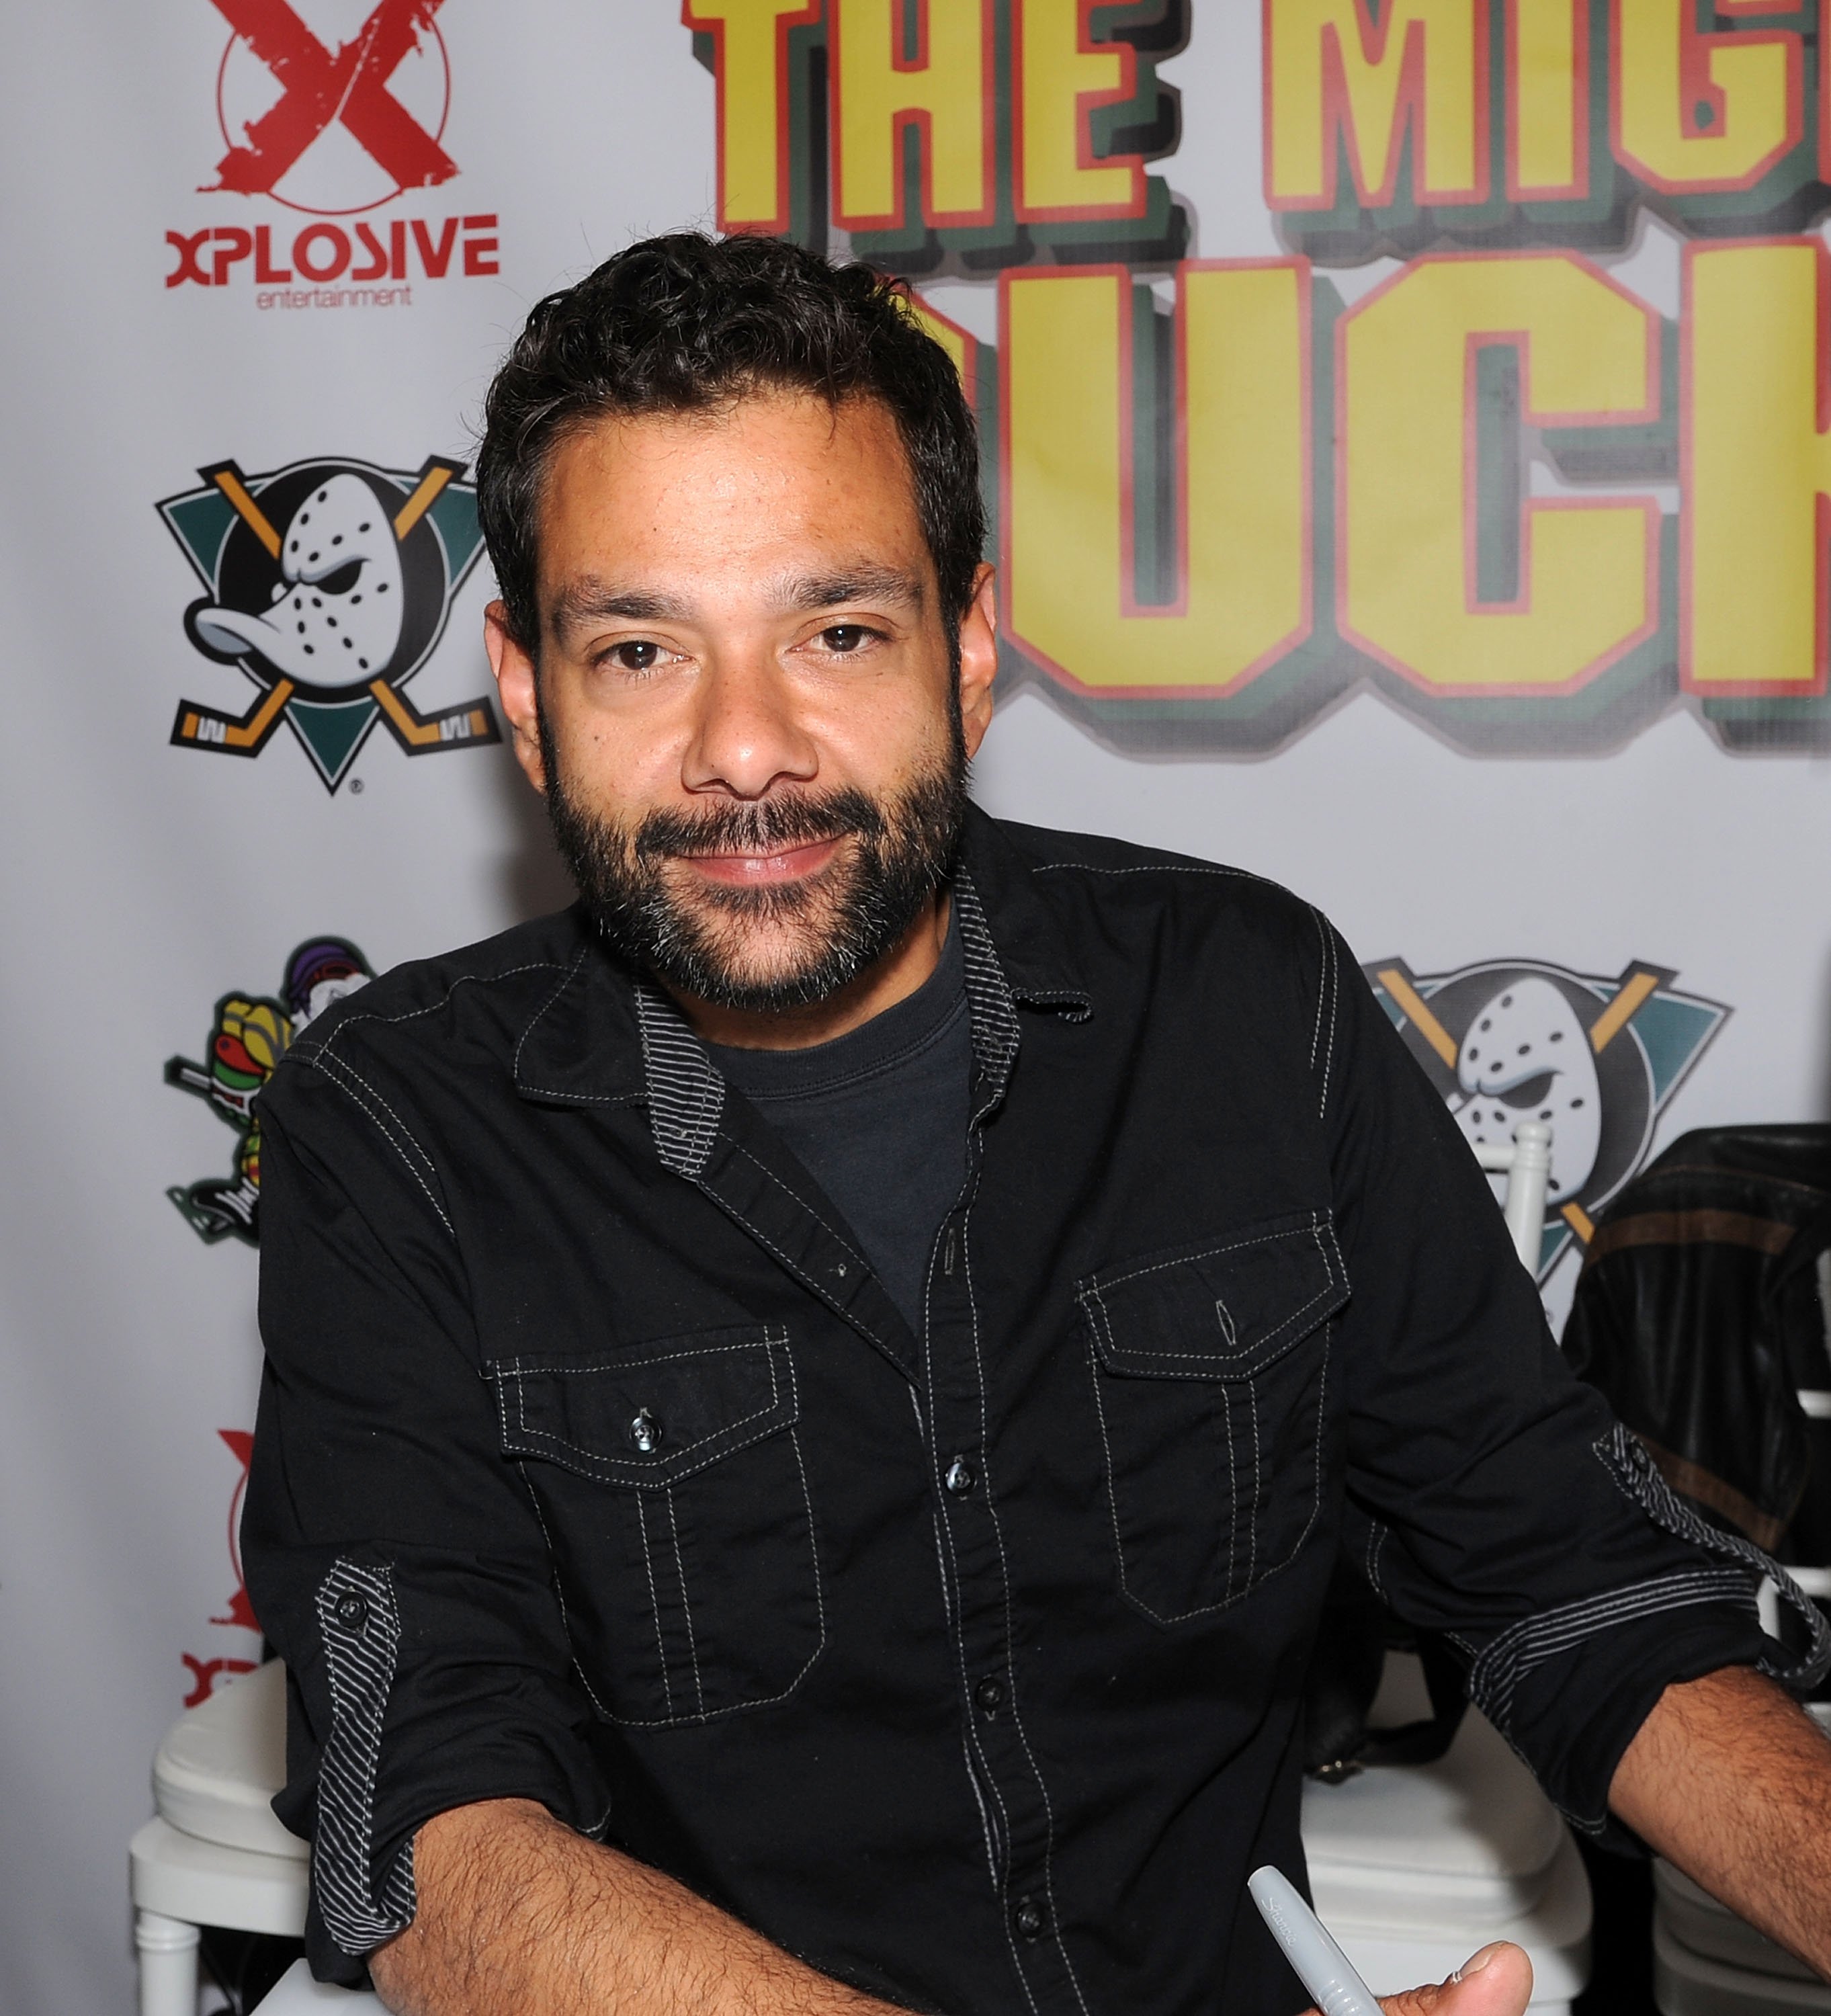 Shaun Weiss from the movie "The Mighty Ducks" attends day 2 of the Chiller Theater Expo on April 25, 2015 | Photo: Getty Images